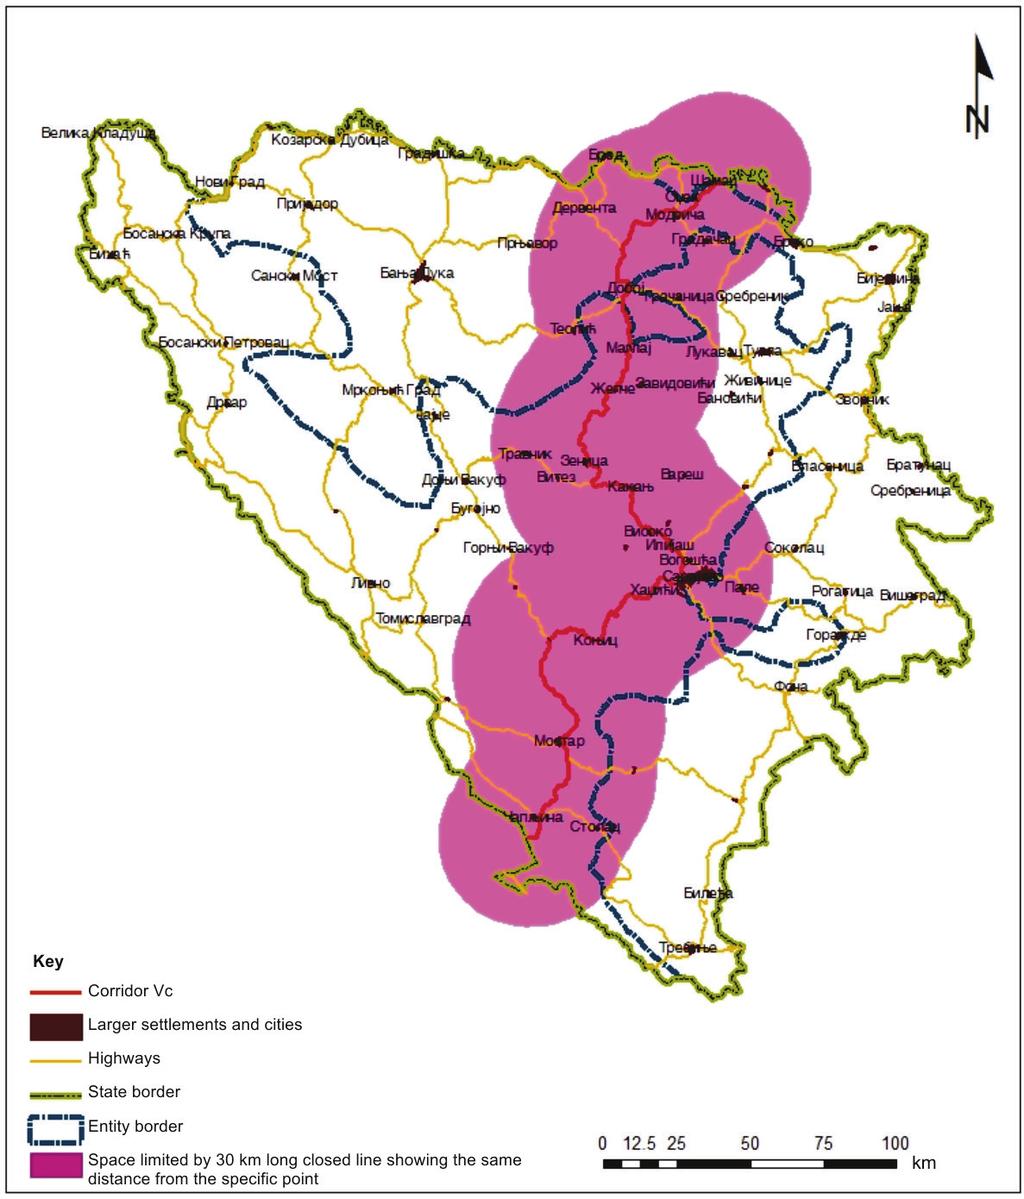 Corridor Vc as a factor of integration of Bosnia and Herzegovina into the European Union Sarajevo, with over 420 thousand inhabitants; the largest urban center with a variety of functions such as